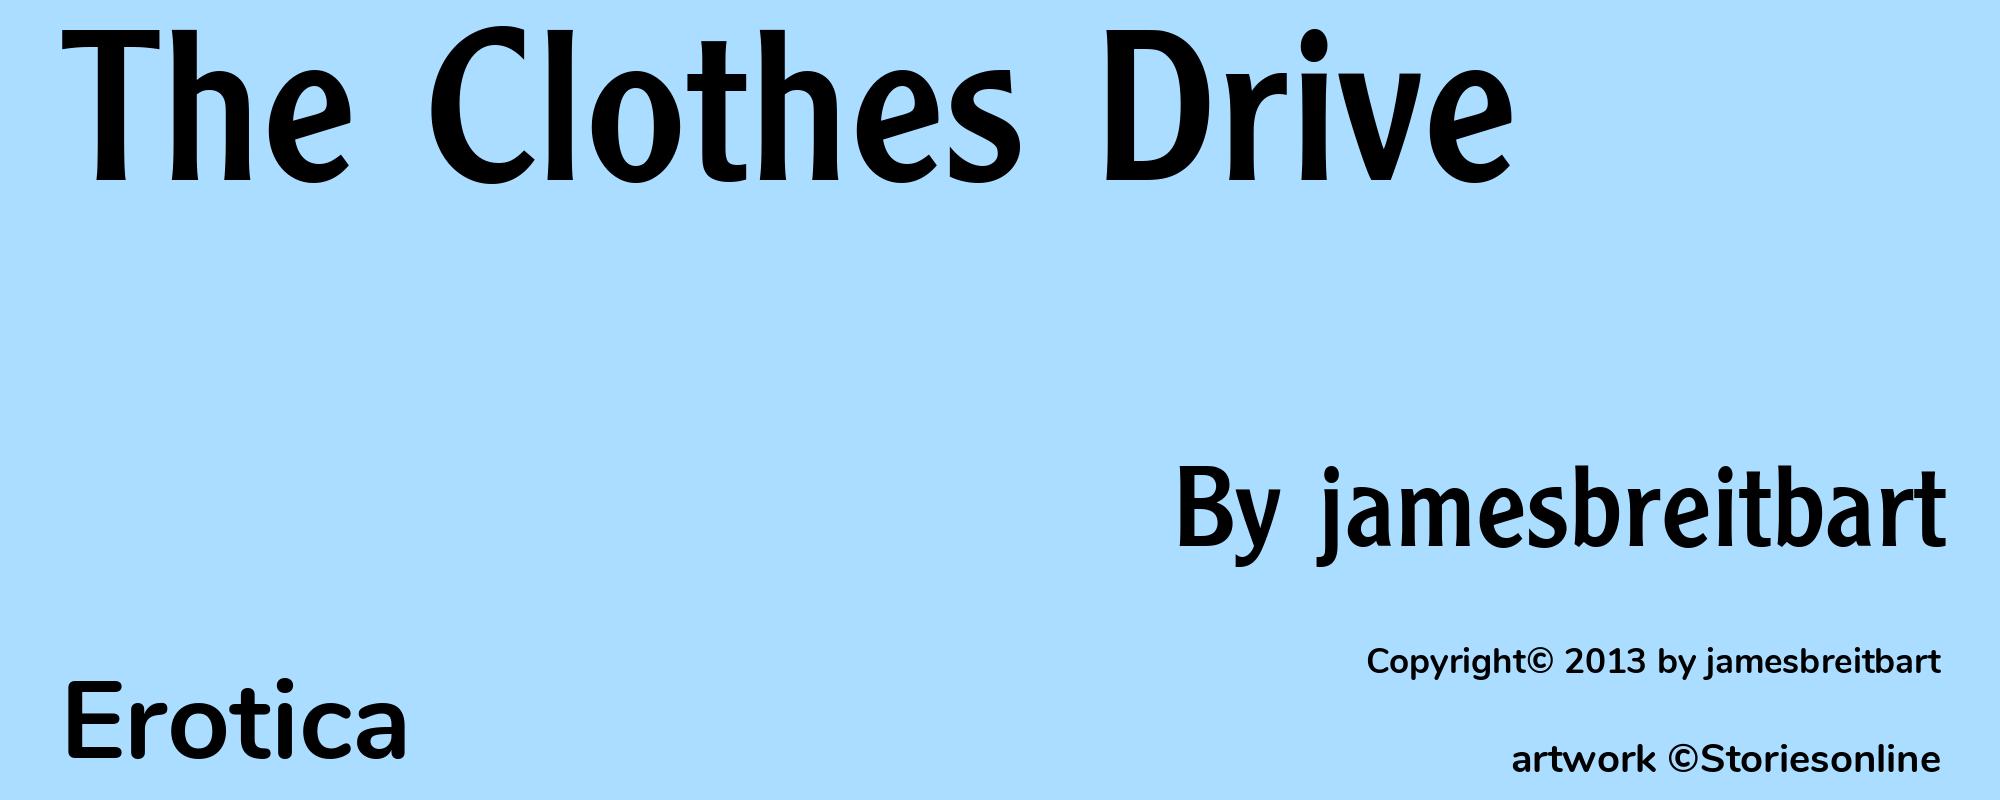 The Clothes Drive - Cover